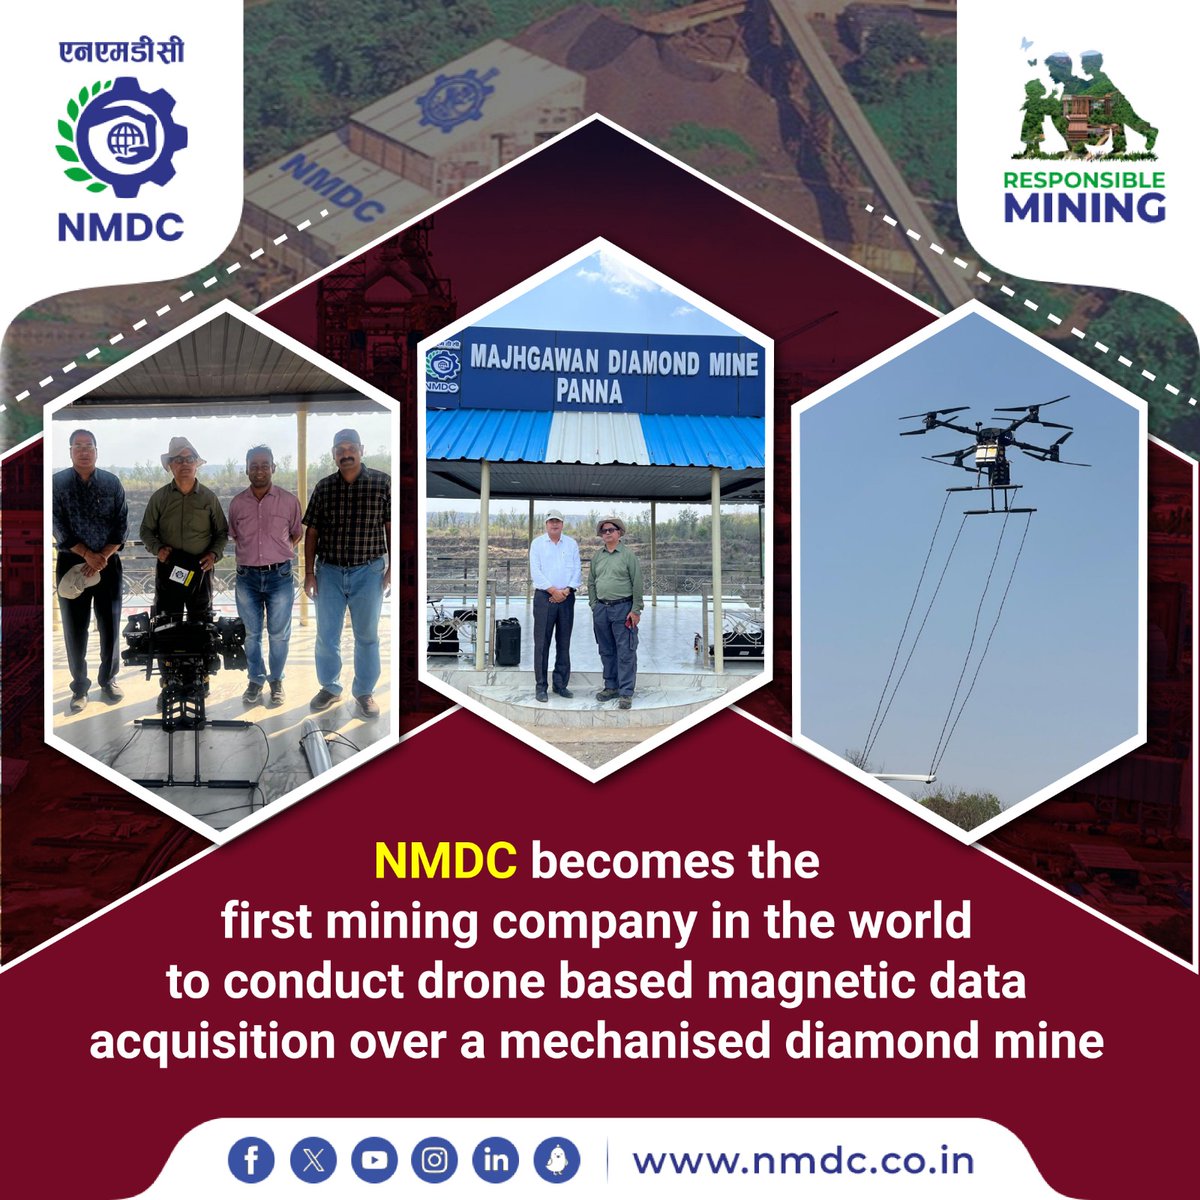 Marking a significant leap in the mining industry, #NMDC achieved this milestone at the Majhgawan Diamond Mine Panna, India. The introduction of advanced technology reflects NMDC's commitment towards digitalization and sustainable mining.